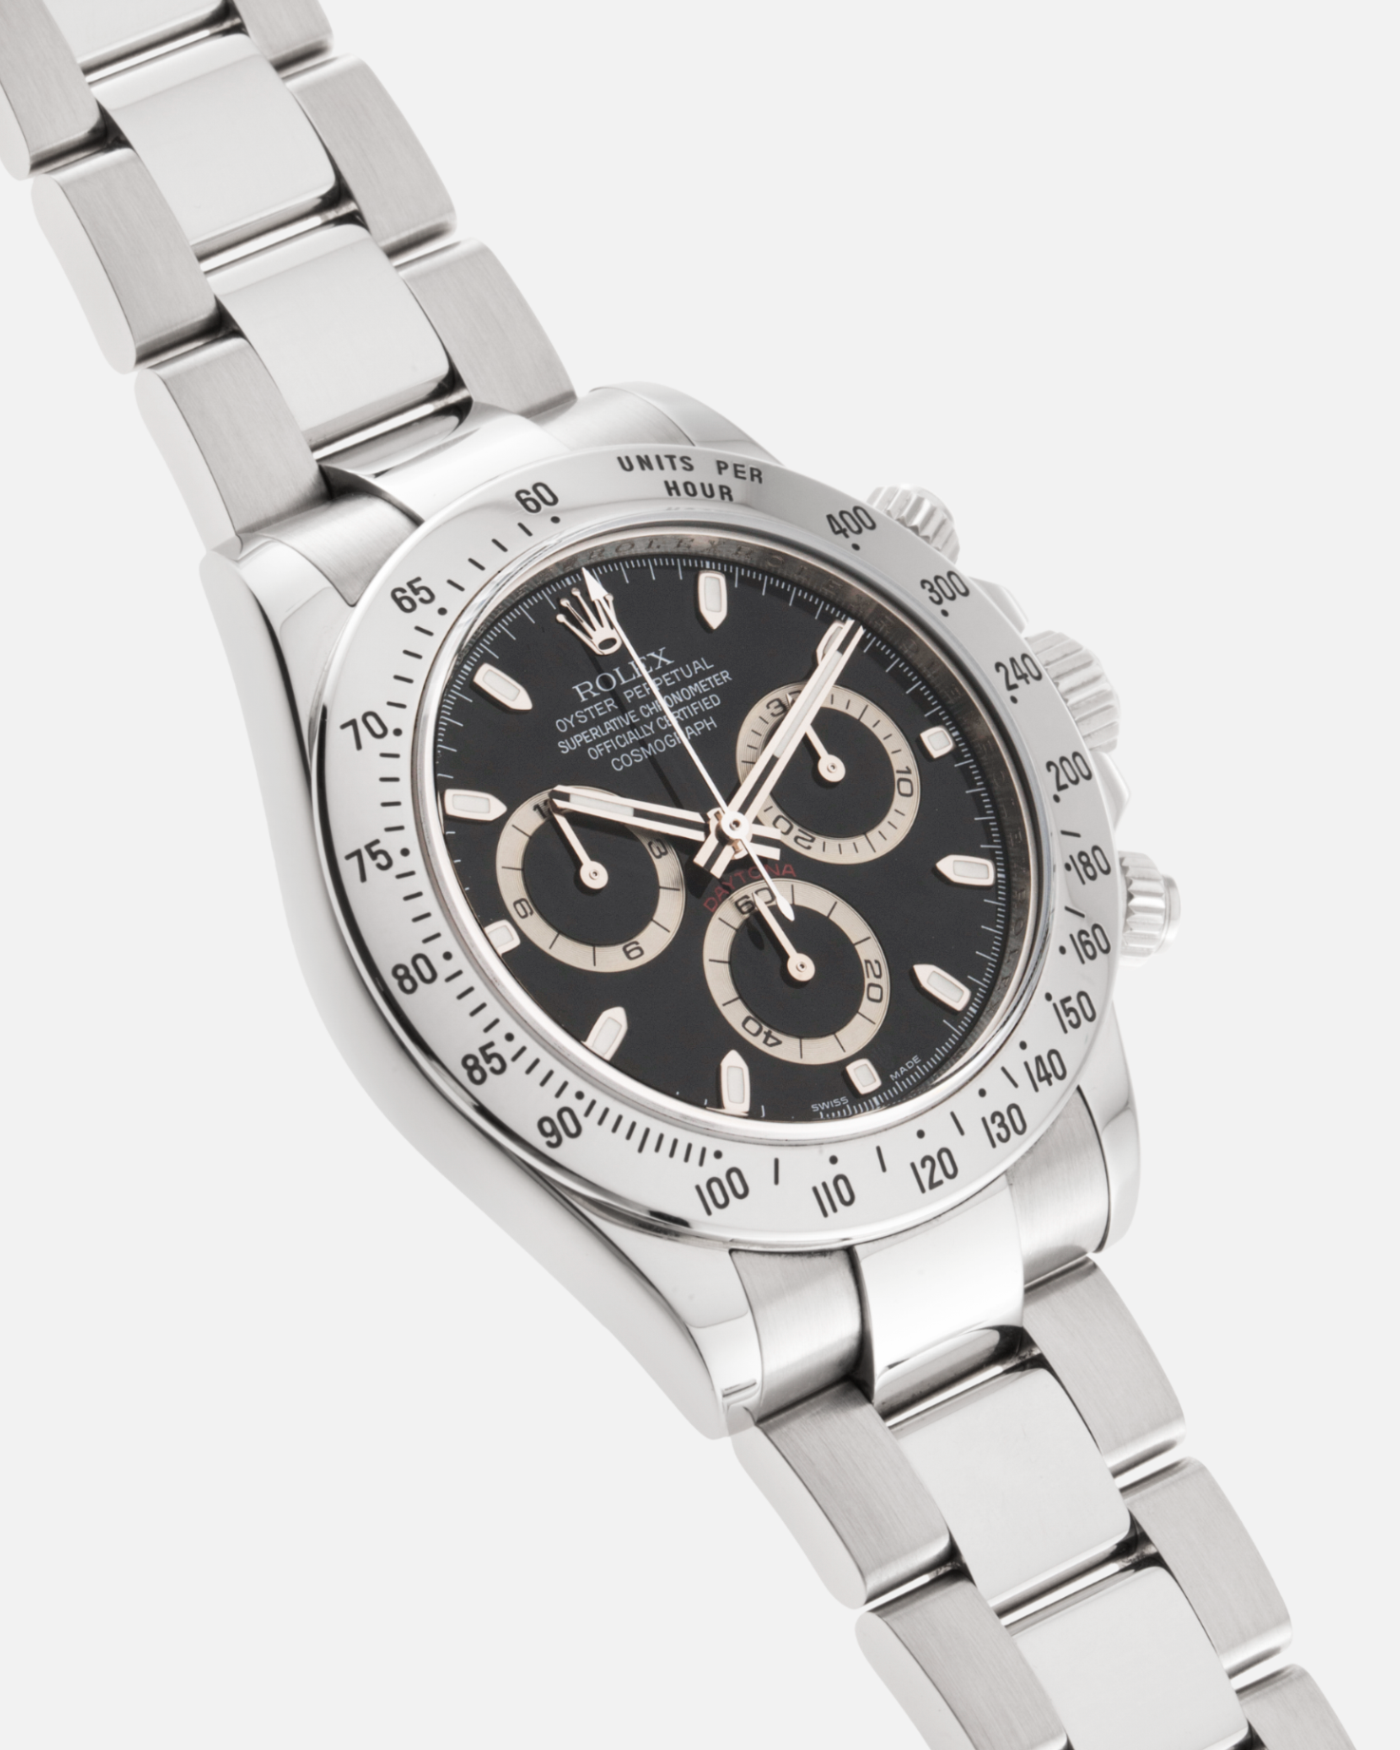 Brand: Rolex Year: 2007 Model: Daytona Reference: 116520 Material: Stainless Steel Movement: Calibre 4130 Case Diameter: 40mm Strap: Stainless Steel Rolex Oyster Bracelet